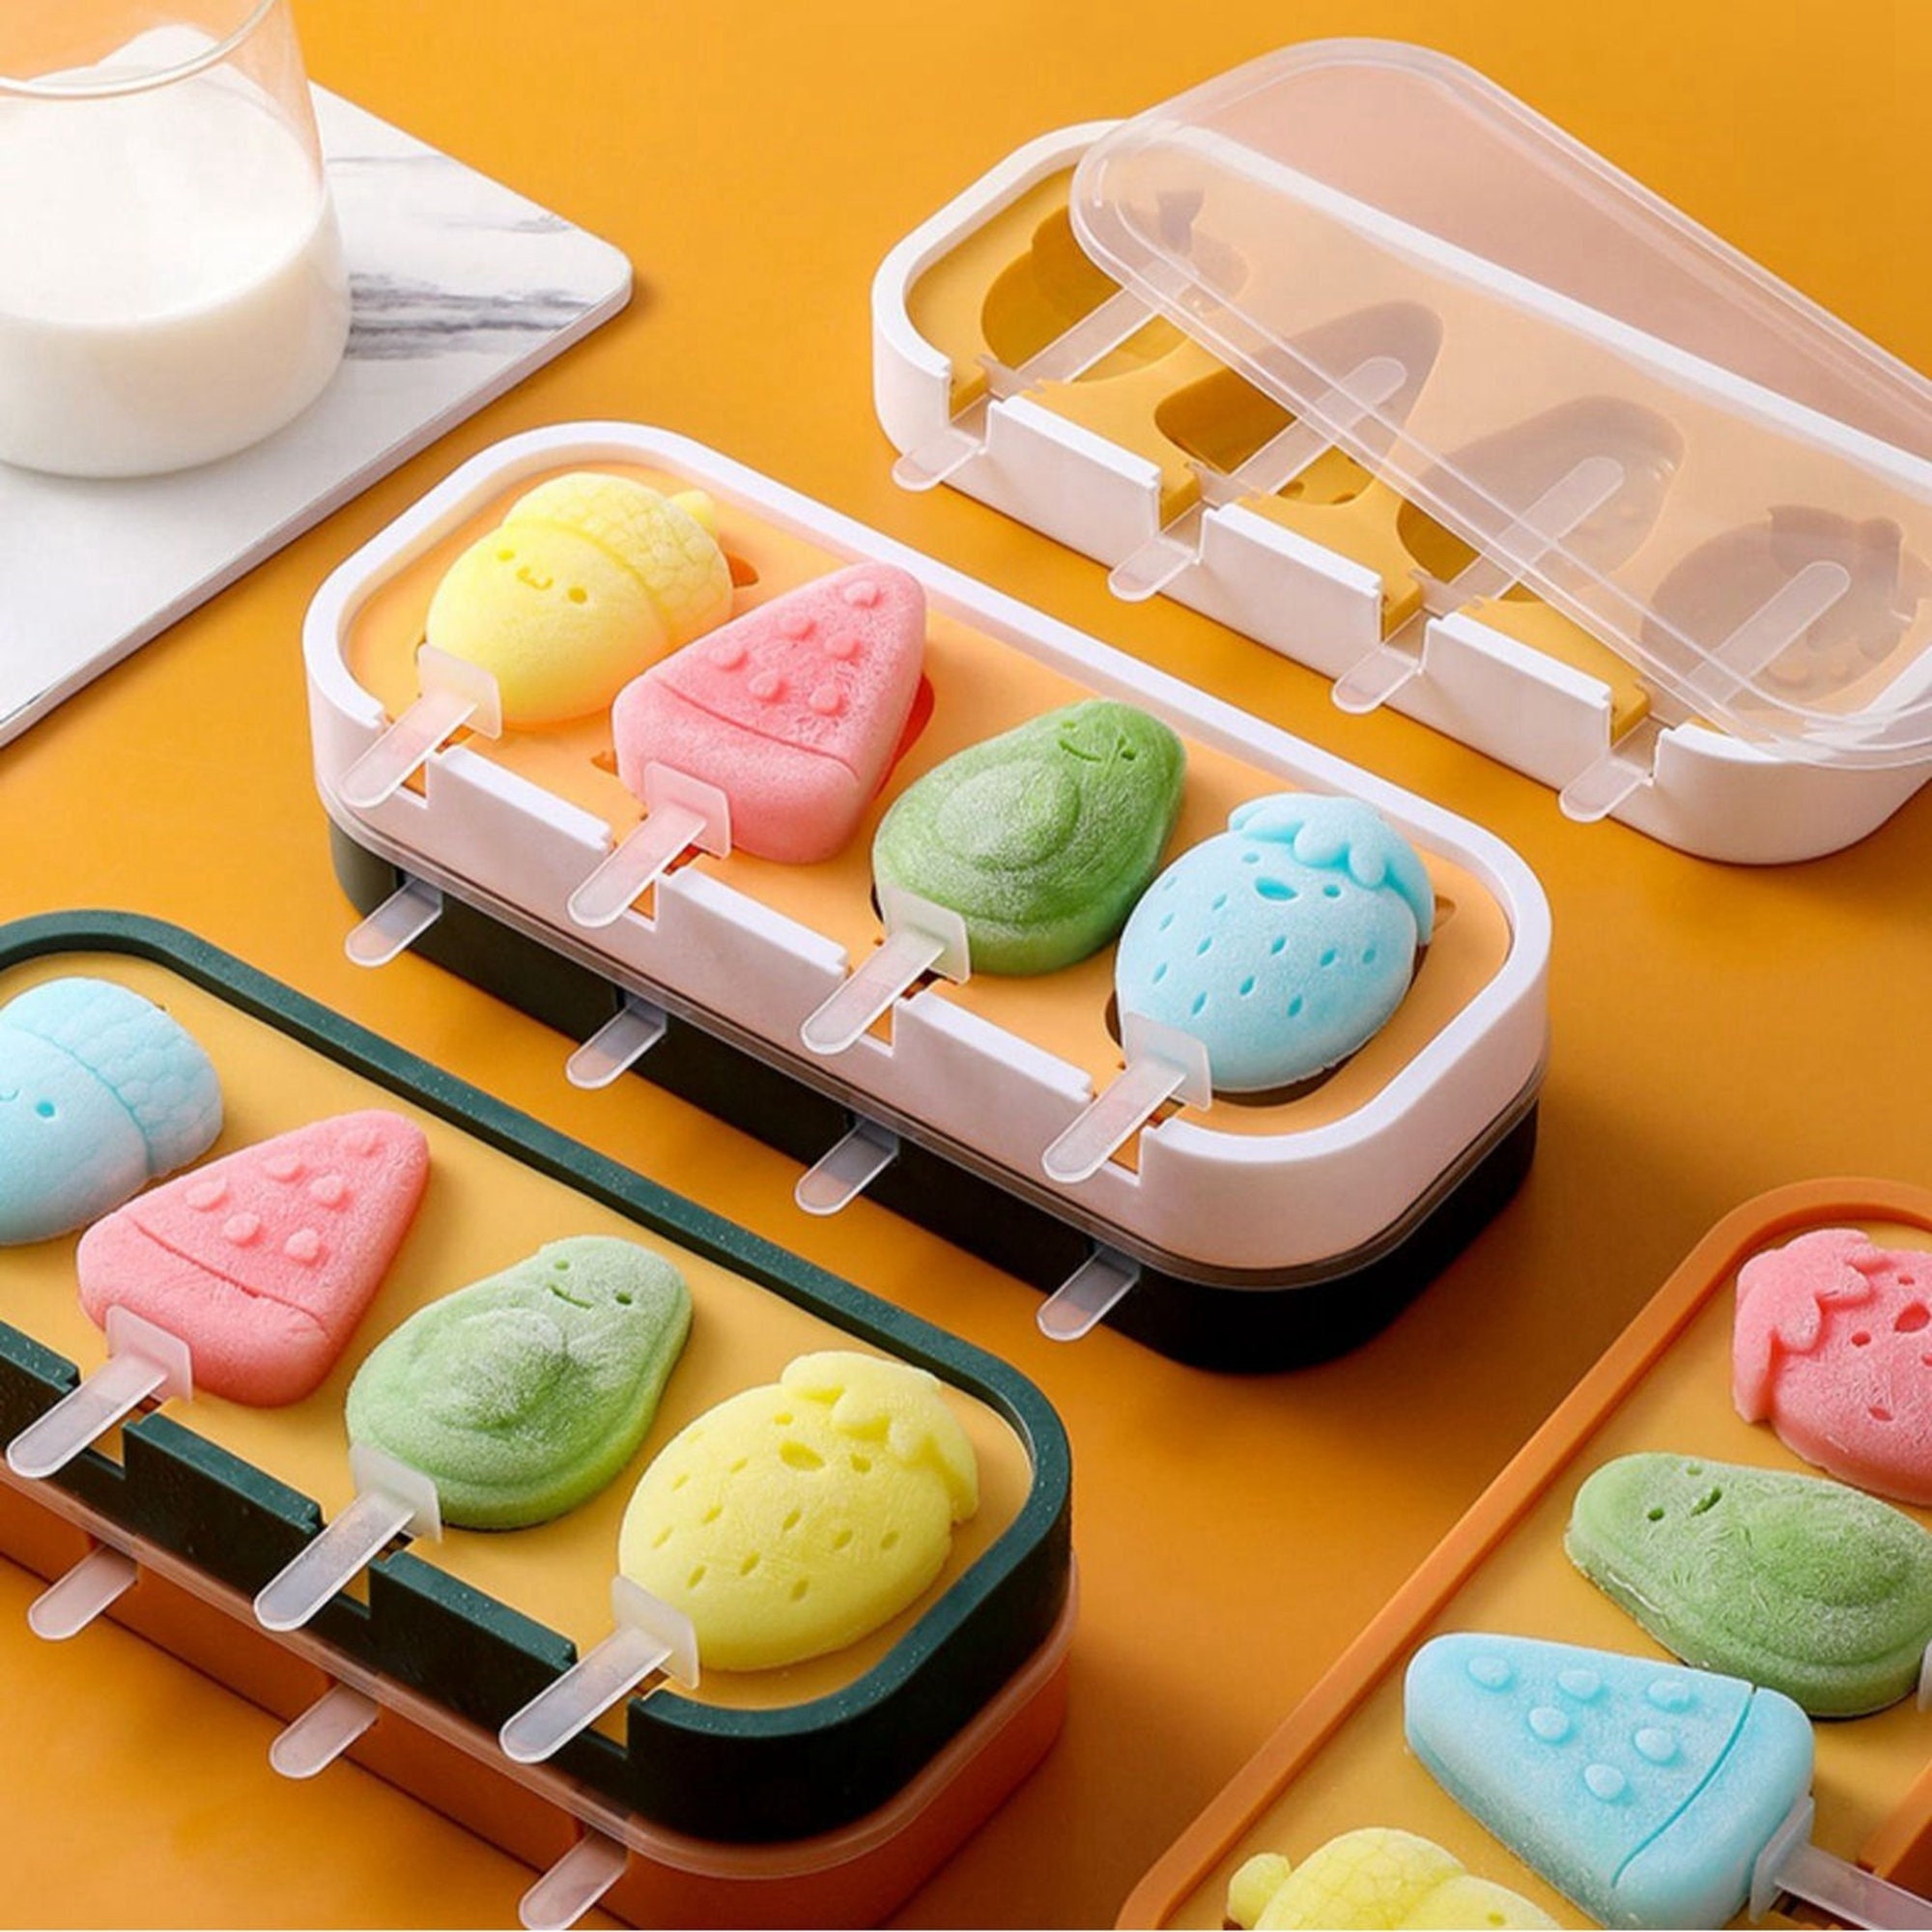 18 Pack Popsicle Ice Cream Pop Molds Maker BPA Free Reusable Ice Cream DIY  Molds Holders With Tray & Sticks Frozen Popsicle Molds Fun for Kids and  Adults Great Gift for Party 